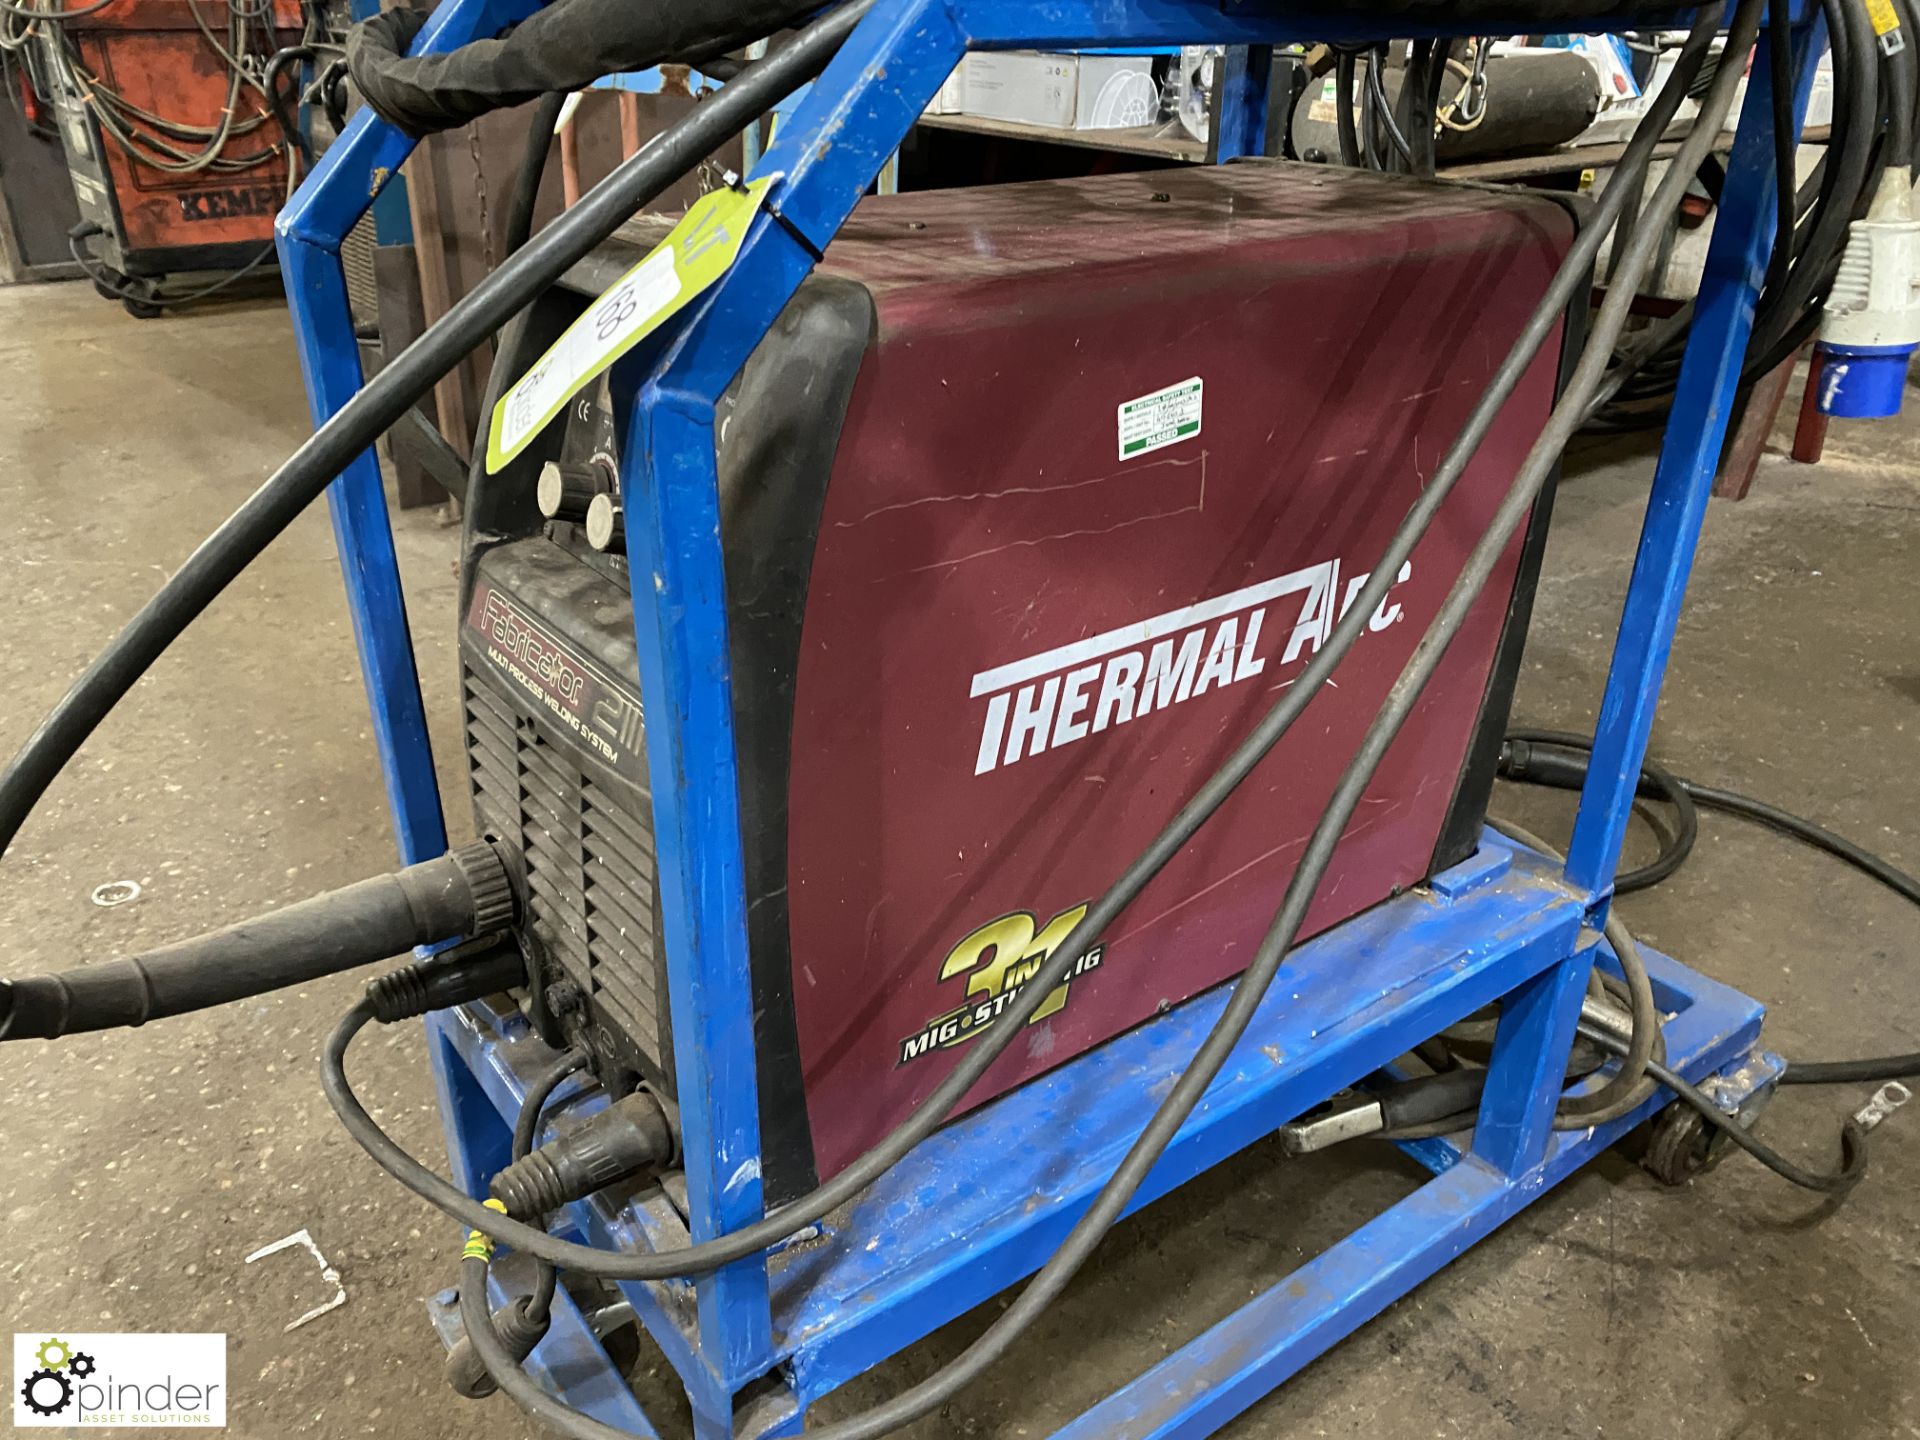 Thermal-Arc Fabricator 211i Mig, Tig and Arc Welding Set, 415volts, with trolley